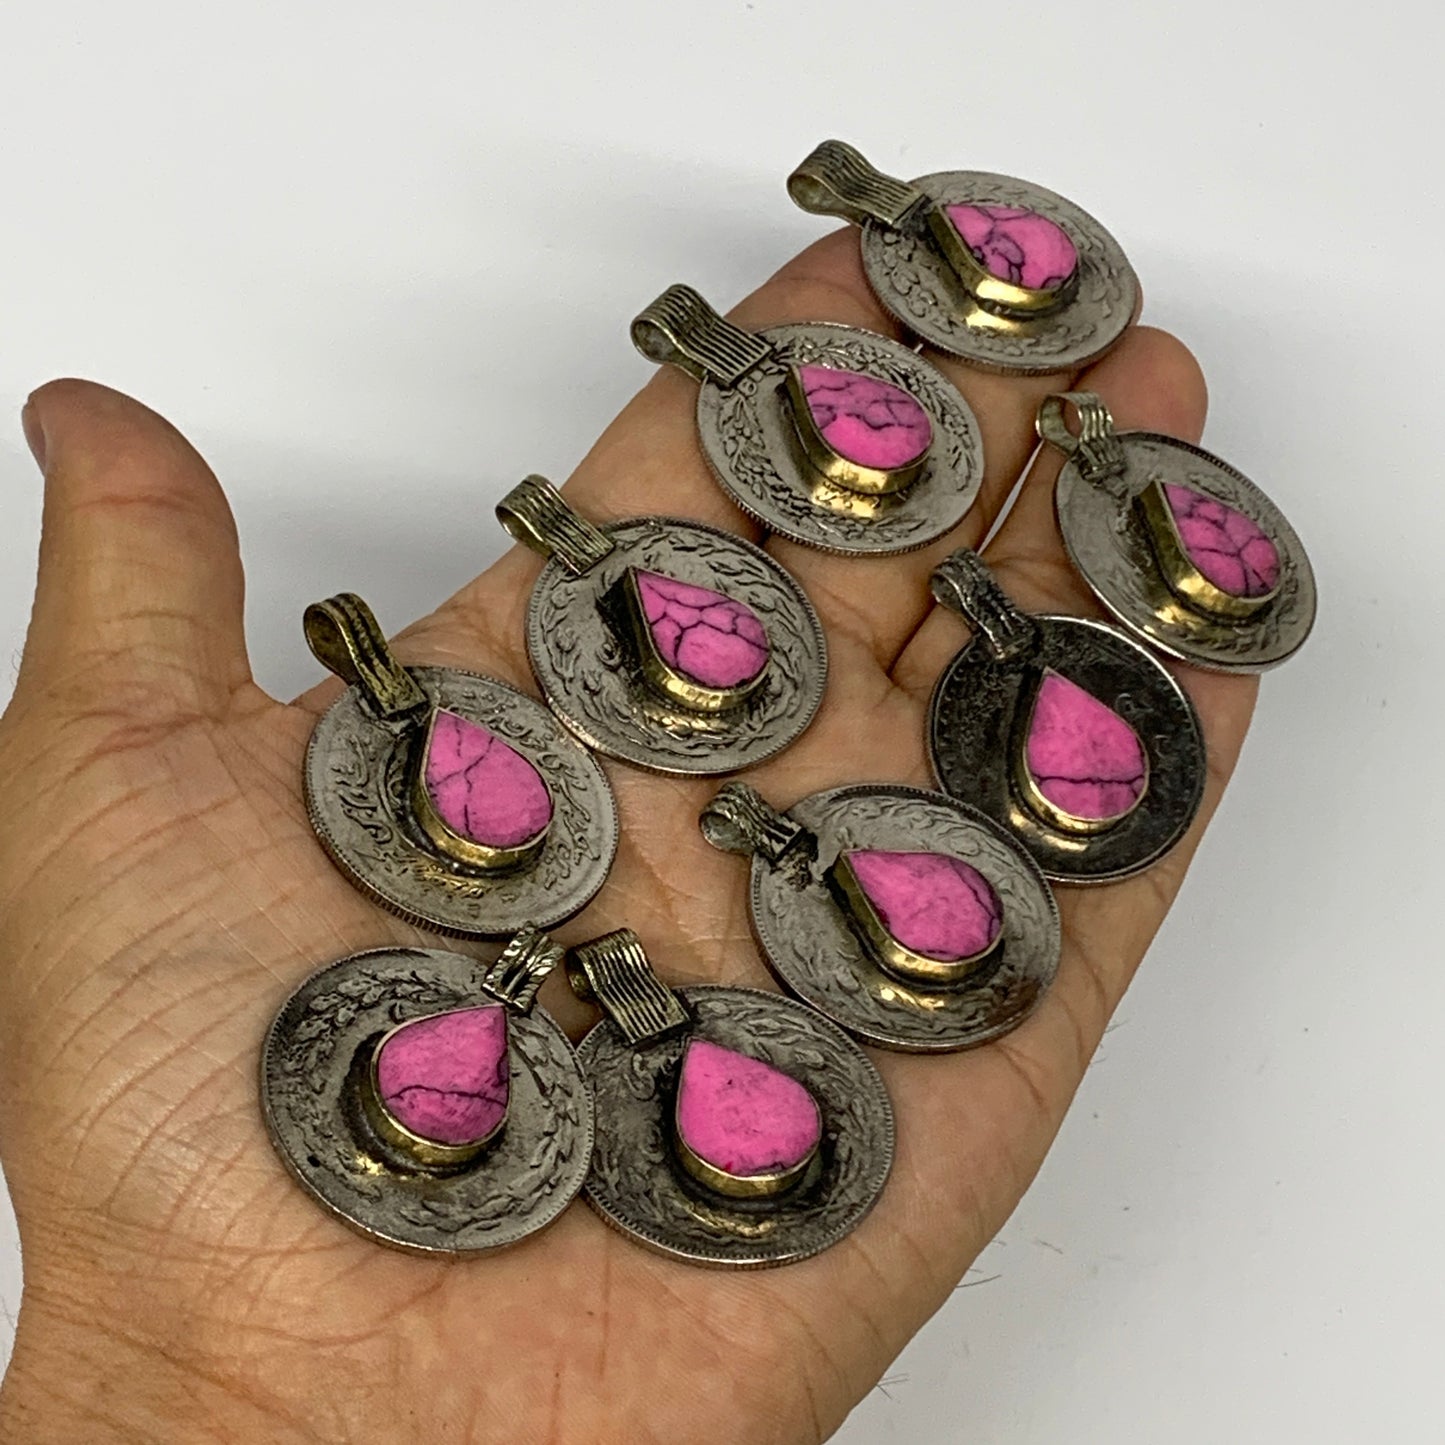 96g, 9pcs, Turkmen Coins Jeweled Synthetic Pink Tribal @Afghanistan, B14534